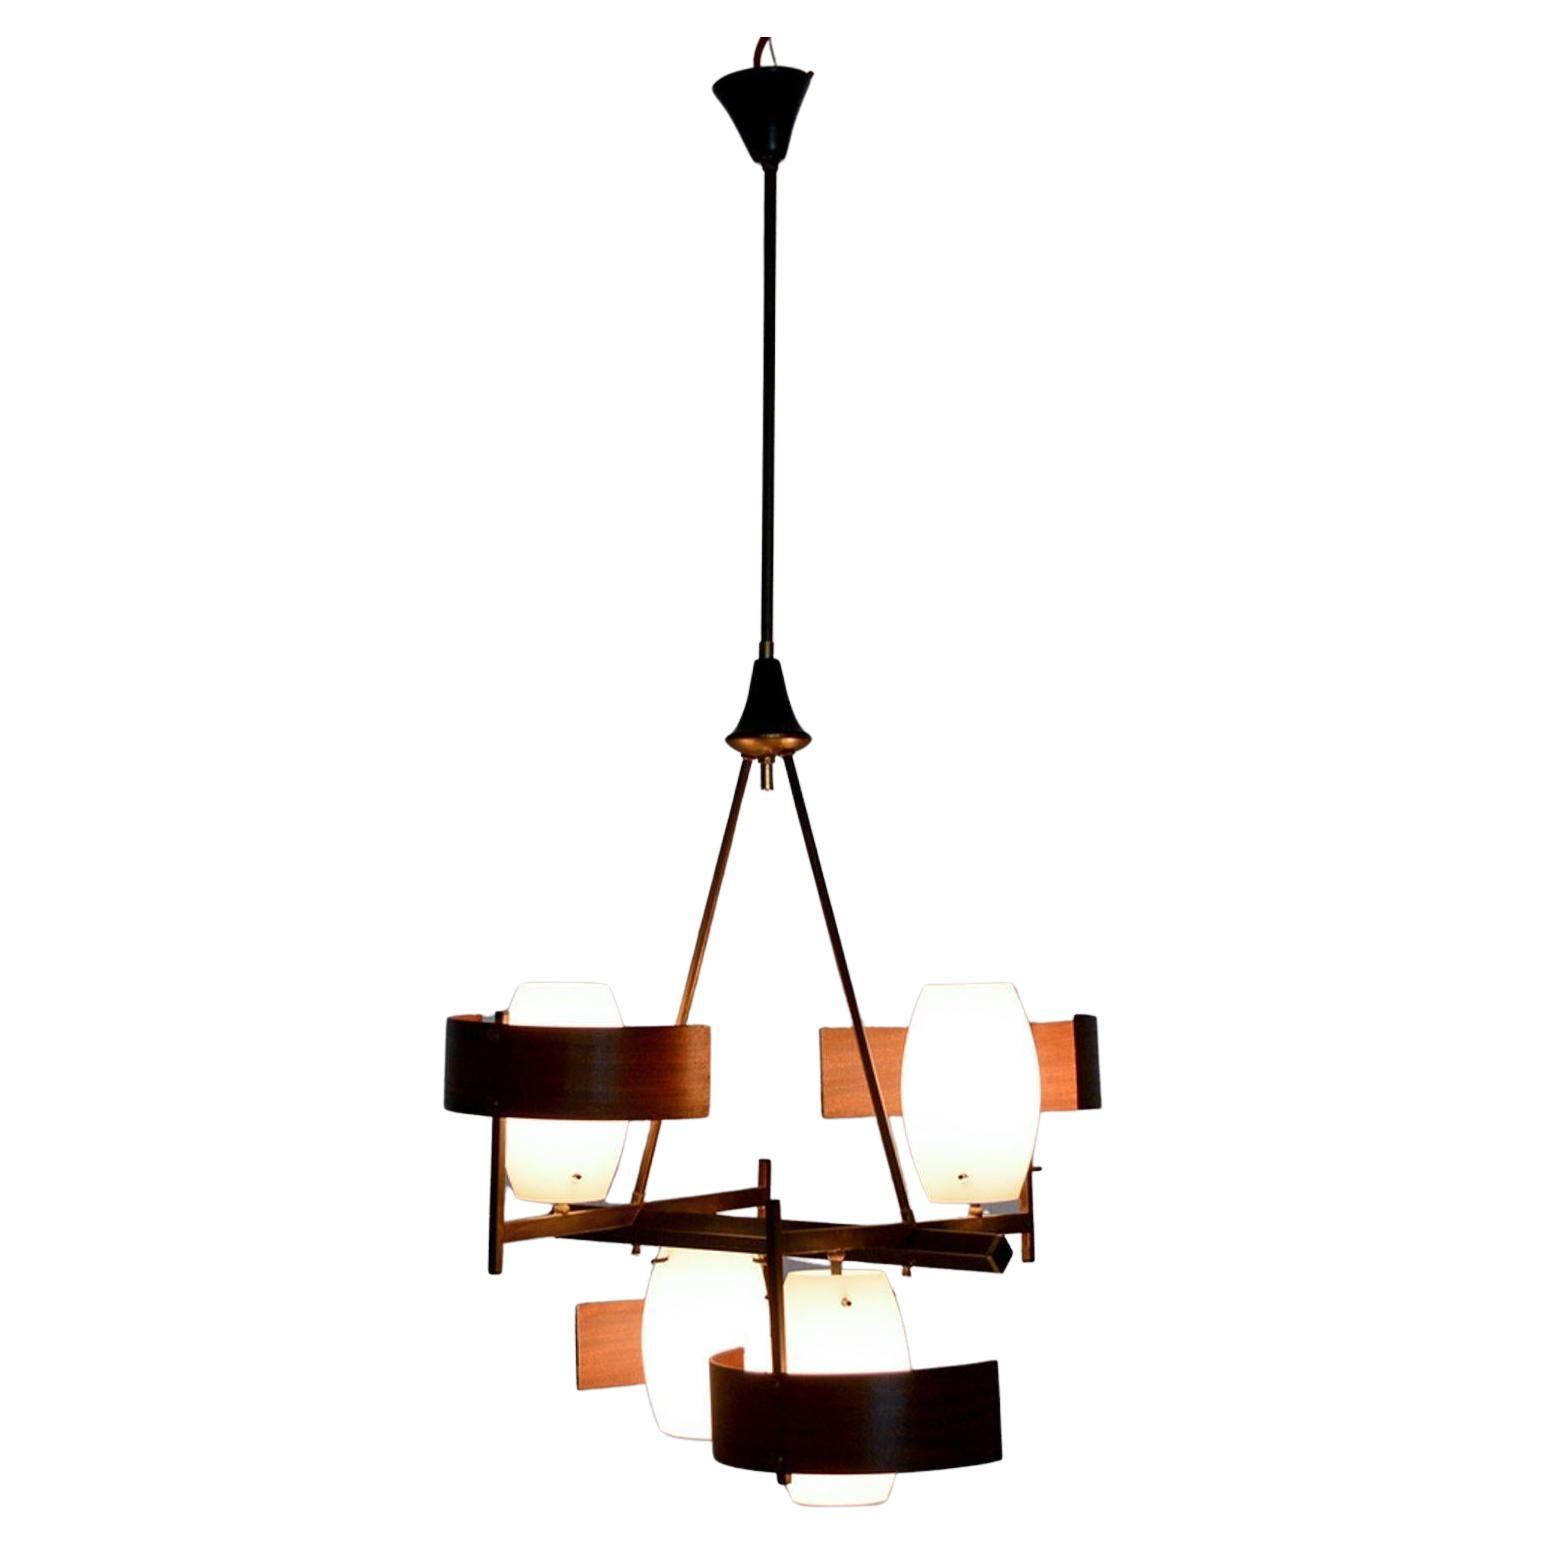 Vintage Italian chandelier patinated brass, sapele bent plywood diffusers and opaline glass shades. 
Aluminum canopies painted in black.
H 41 in. x W 15 in. x D 19 in.
Unmarked. Chandelier requires four E-14 bulbs. Not included. 
Restored, aluminum